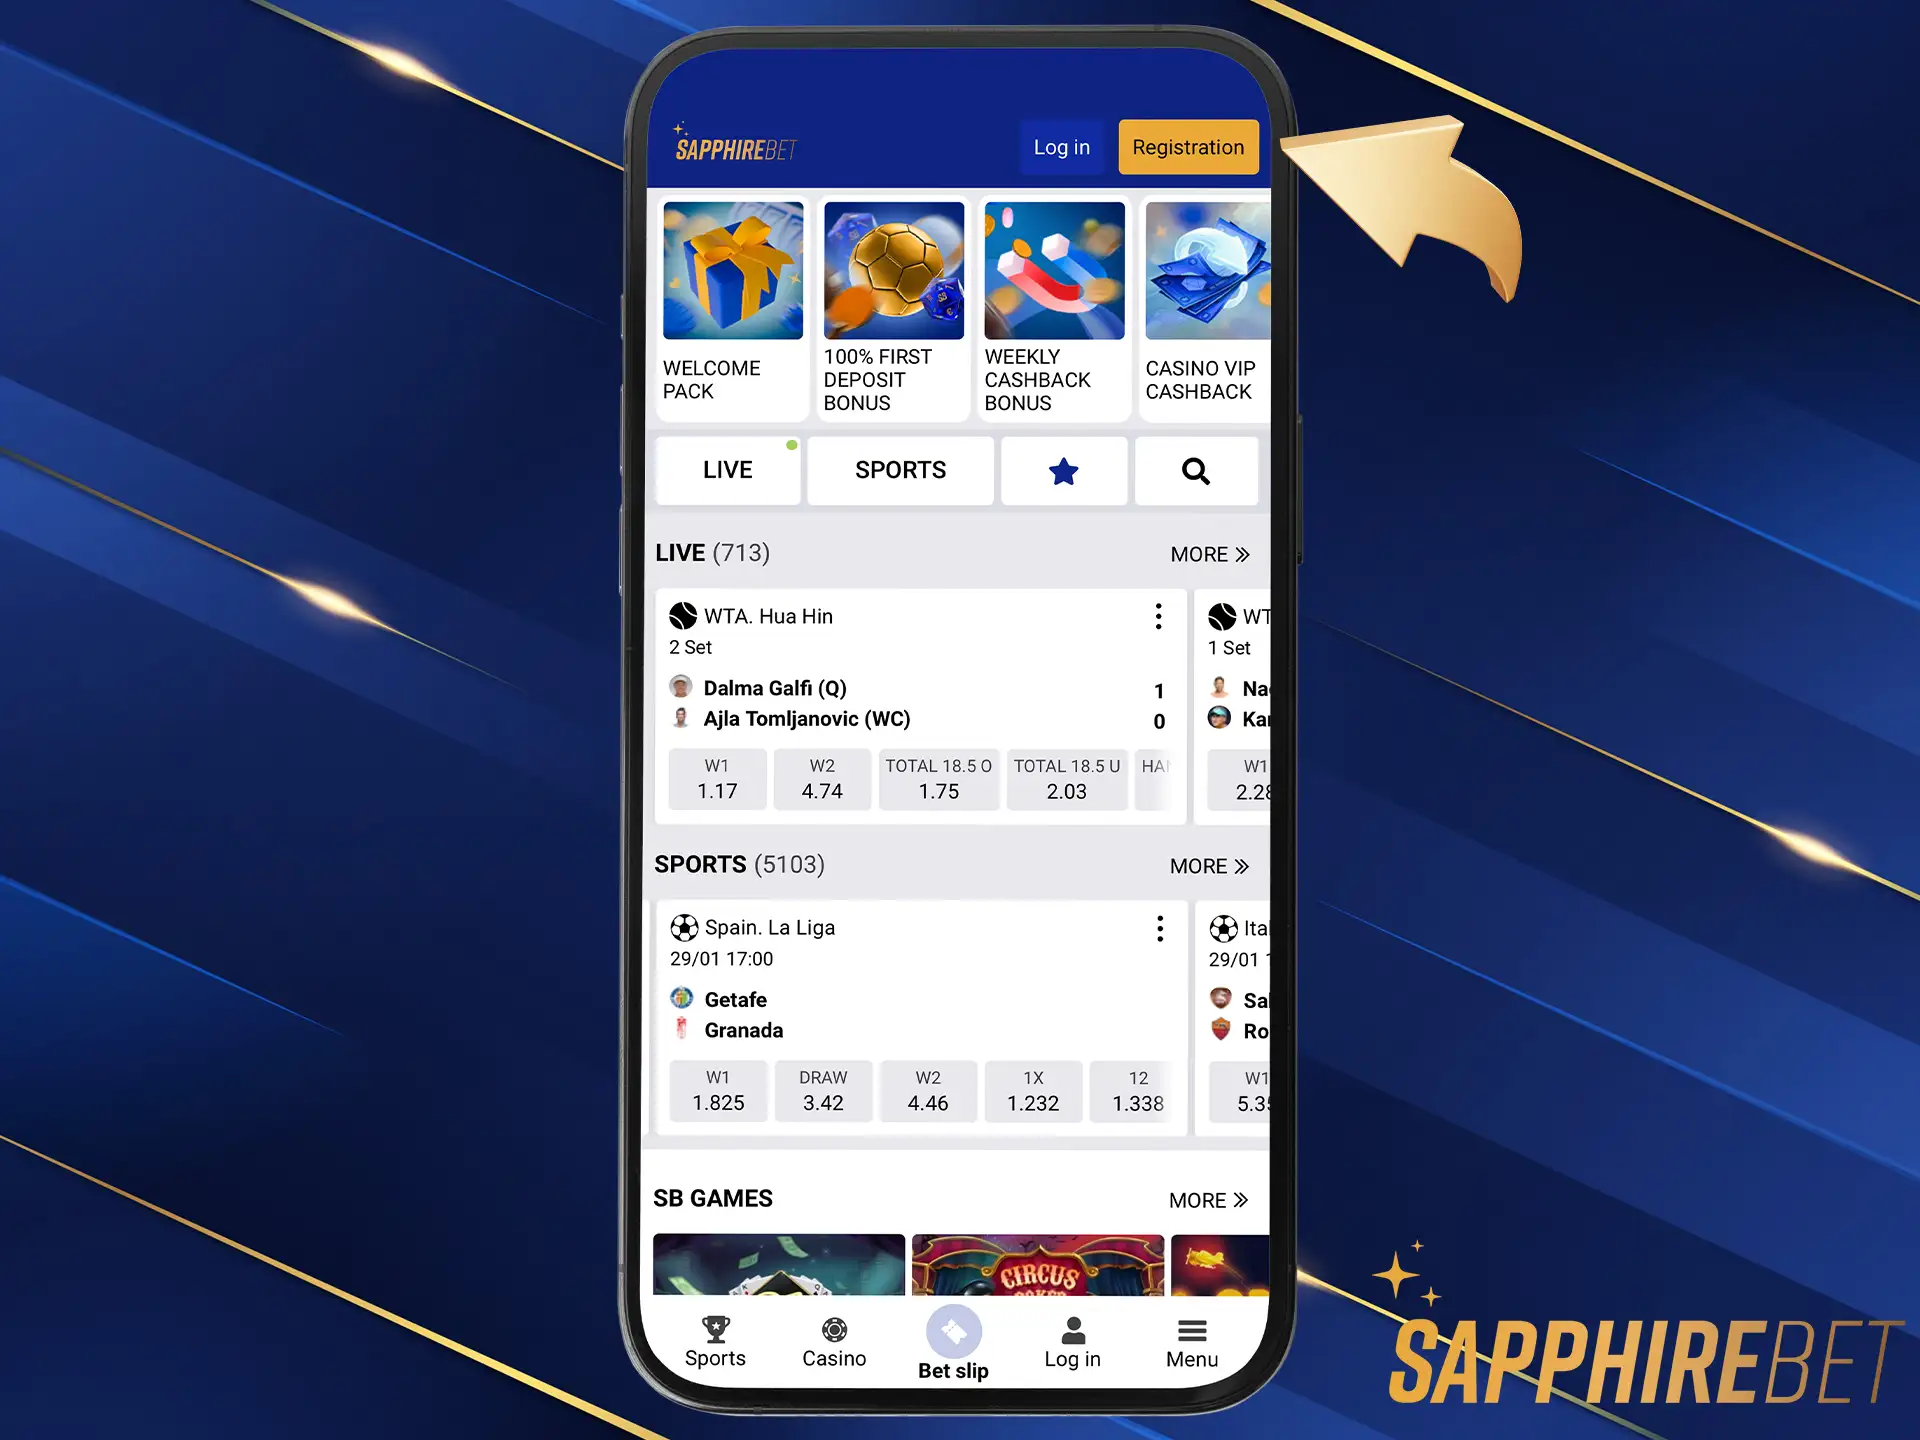 Open the SapphireBet app on your phone.